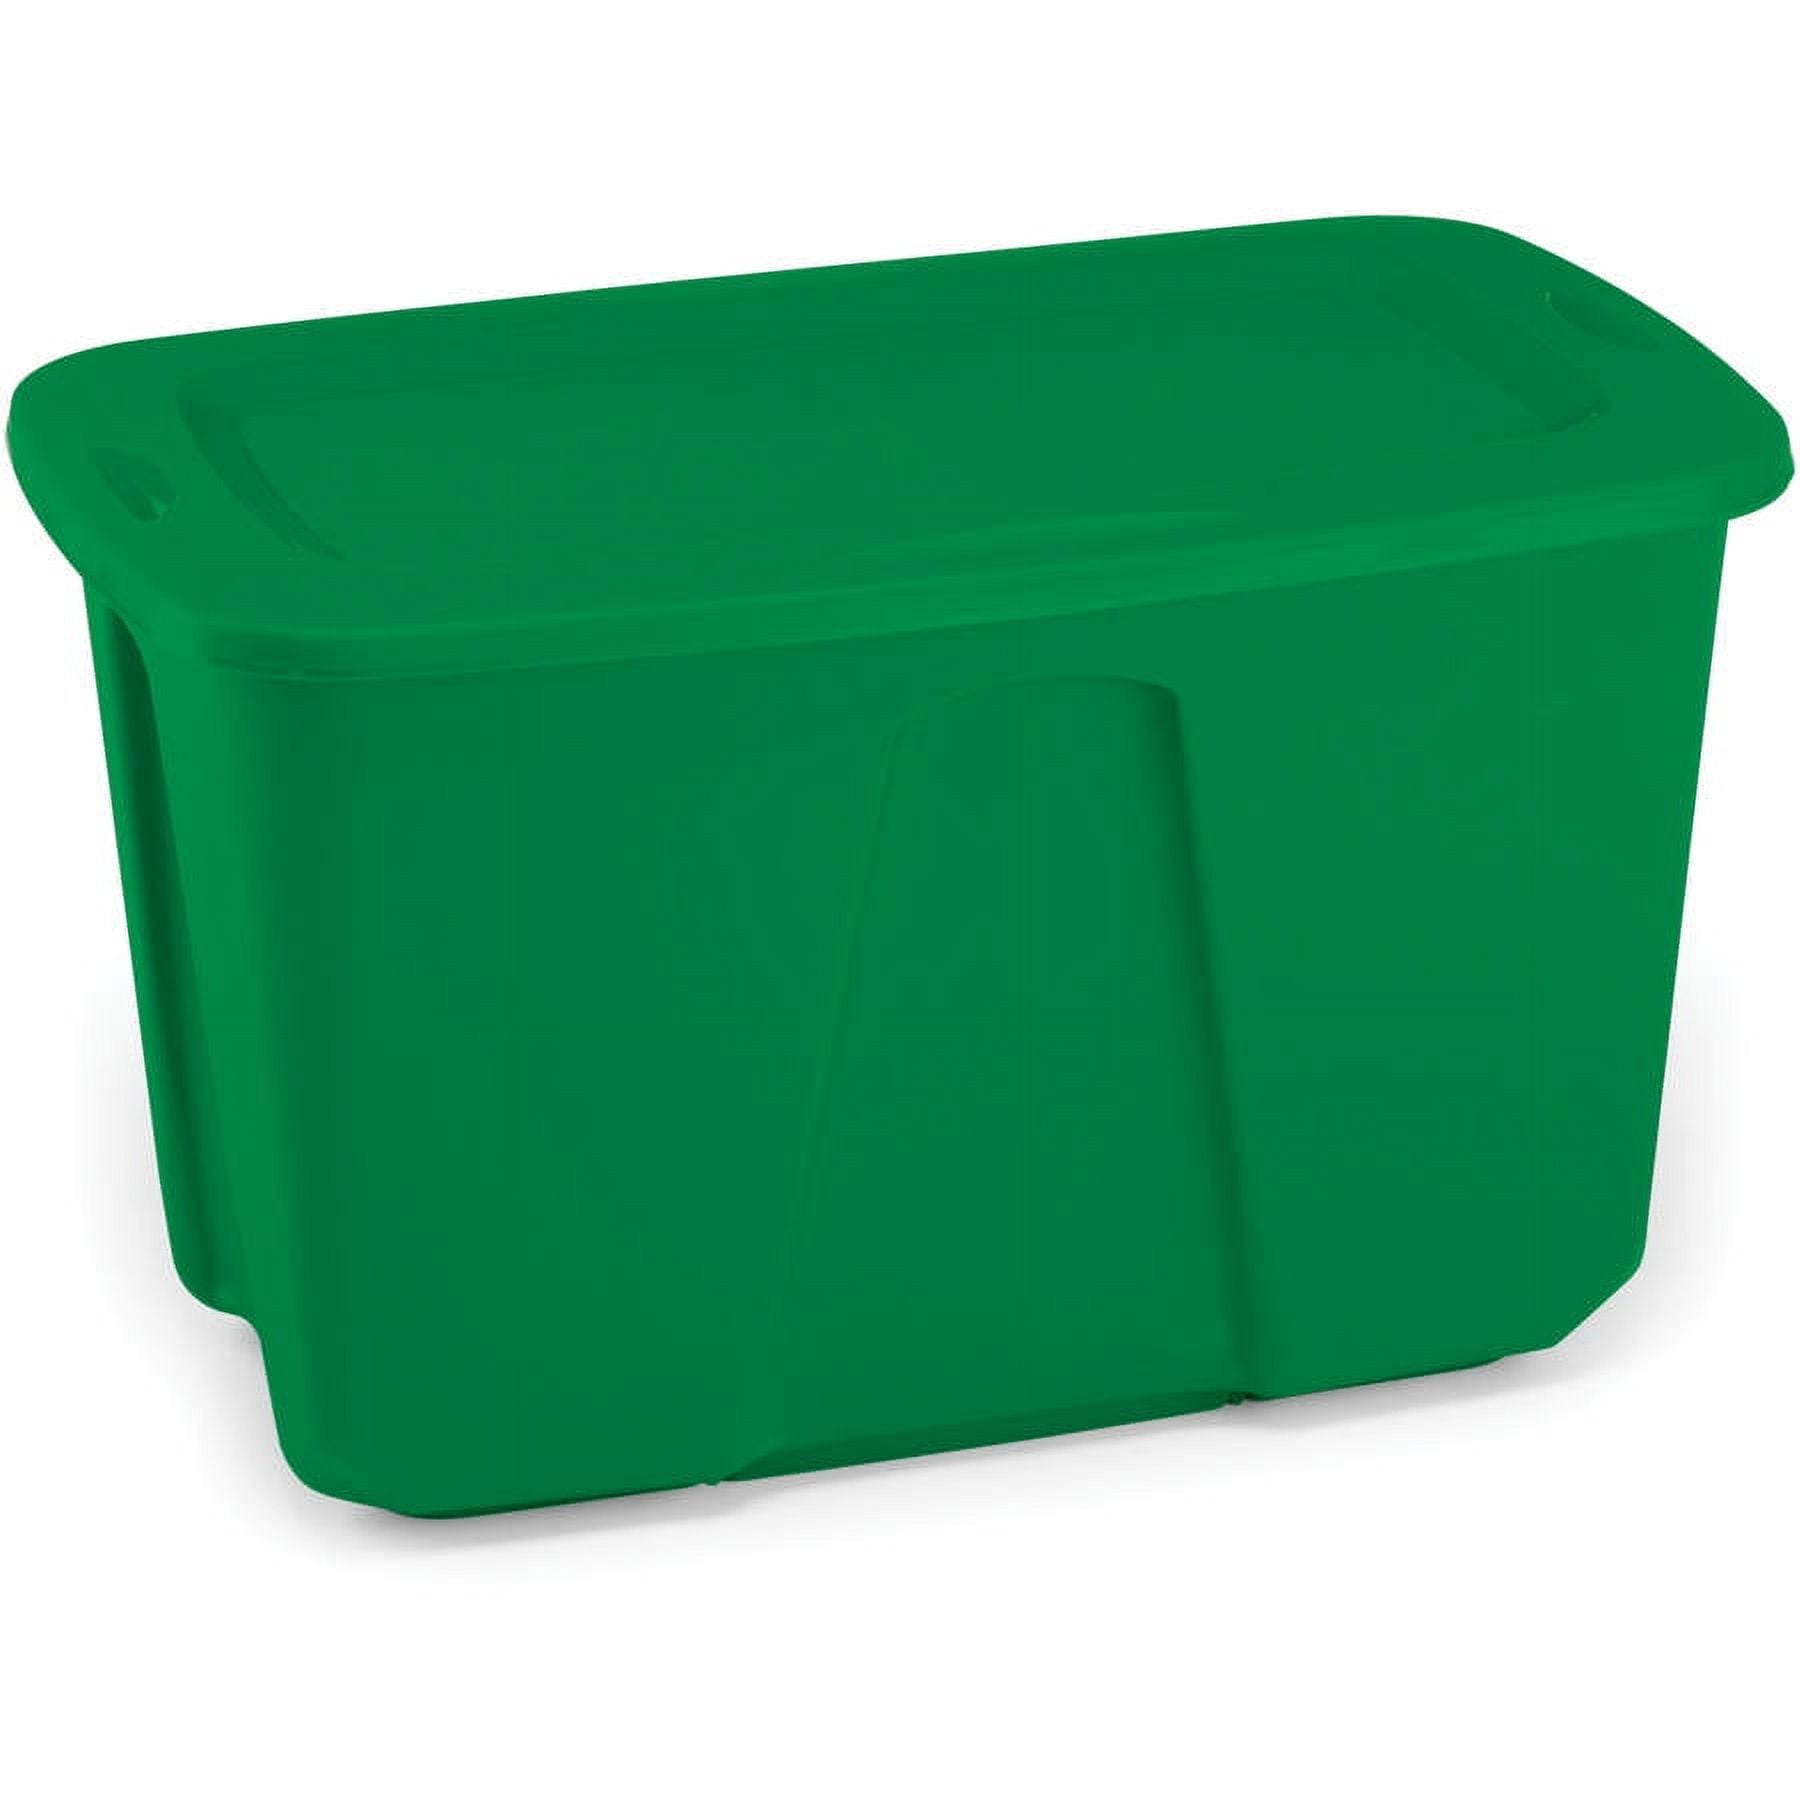 HOMZ Durable 27 Gallon Heavy Duty Holiday Storage Tote, Green/Red, (4  Pack), 1 Piece - Harris Teeter